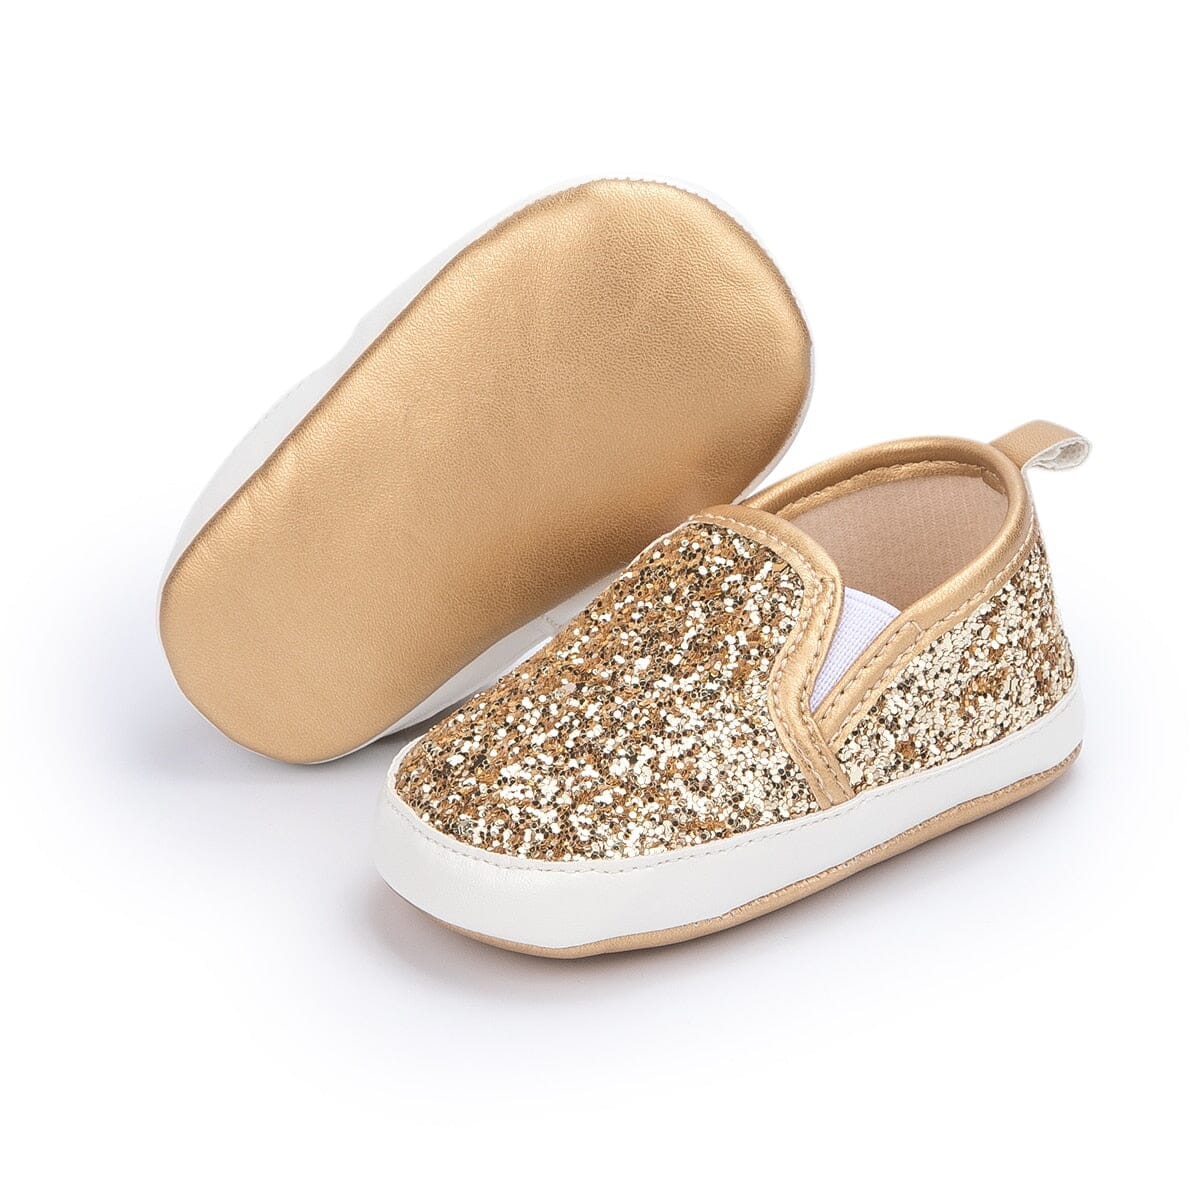 Blissy Premium Outfitters Pubbets Glitter Sneakers. Perfect for our Full-Body Puppets!